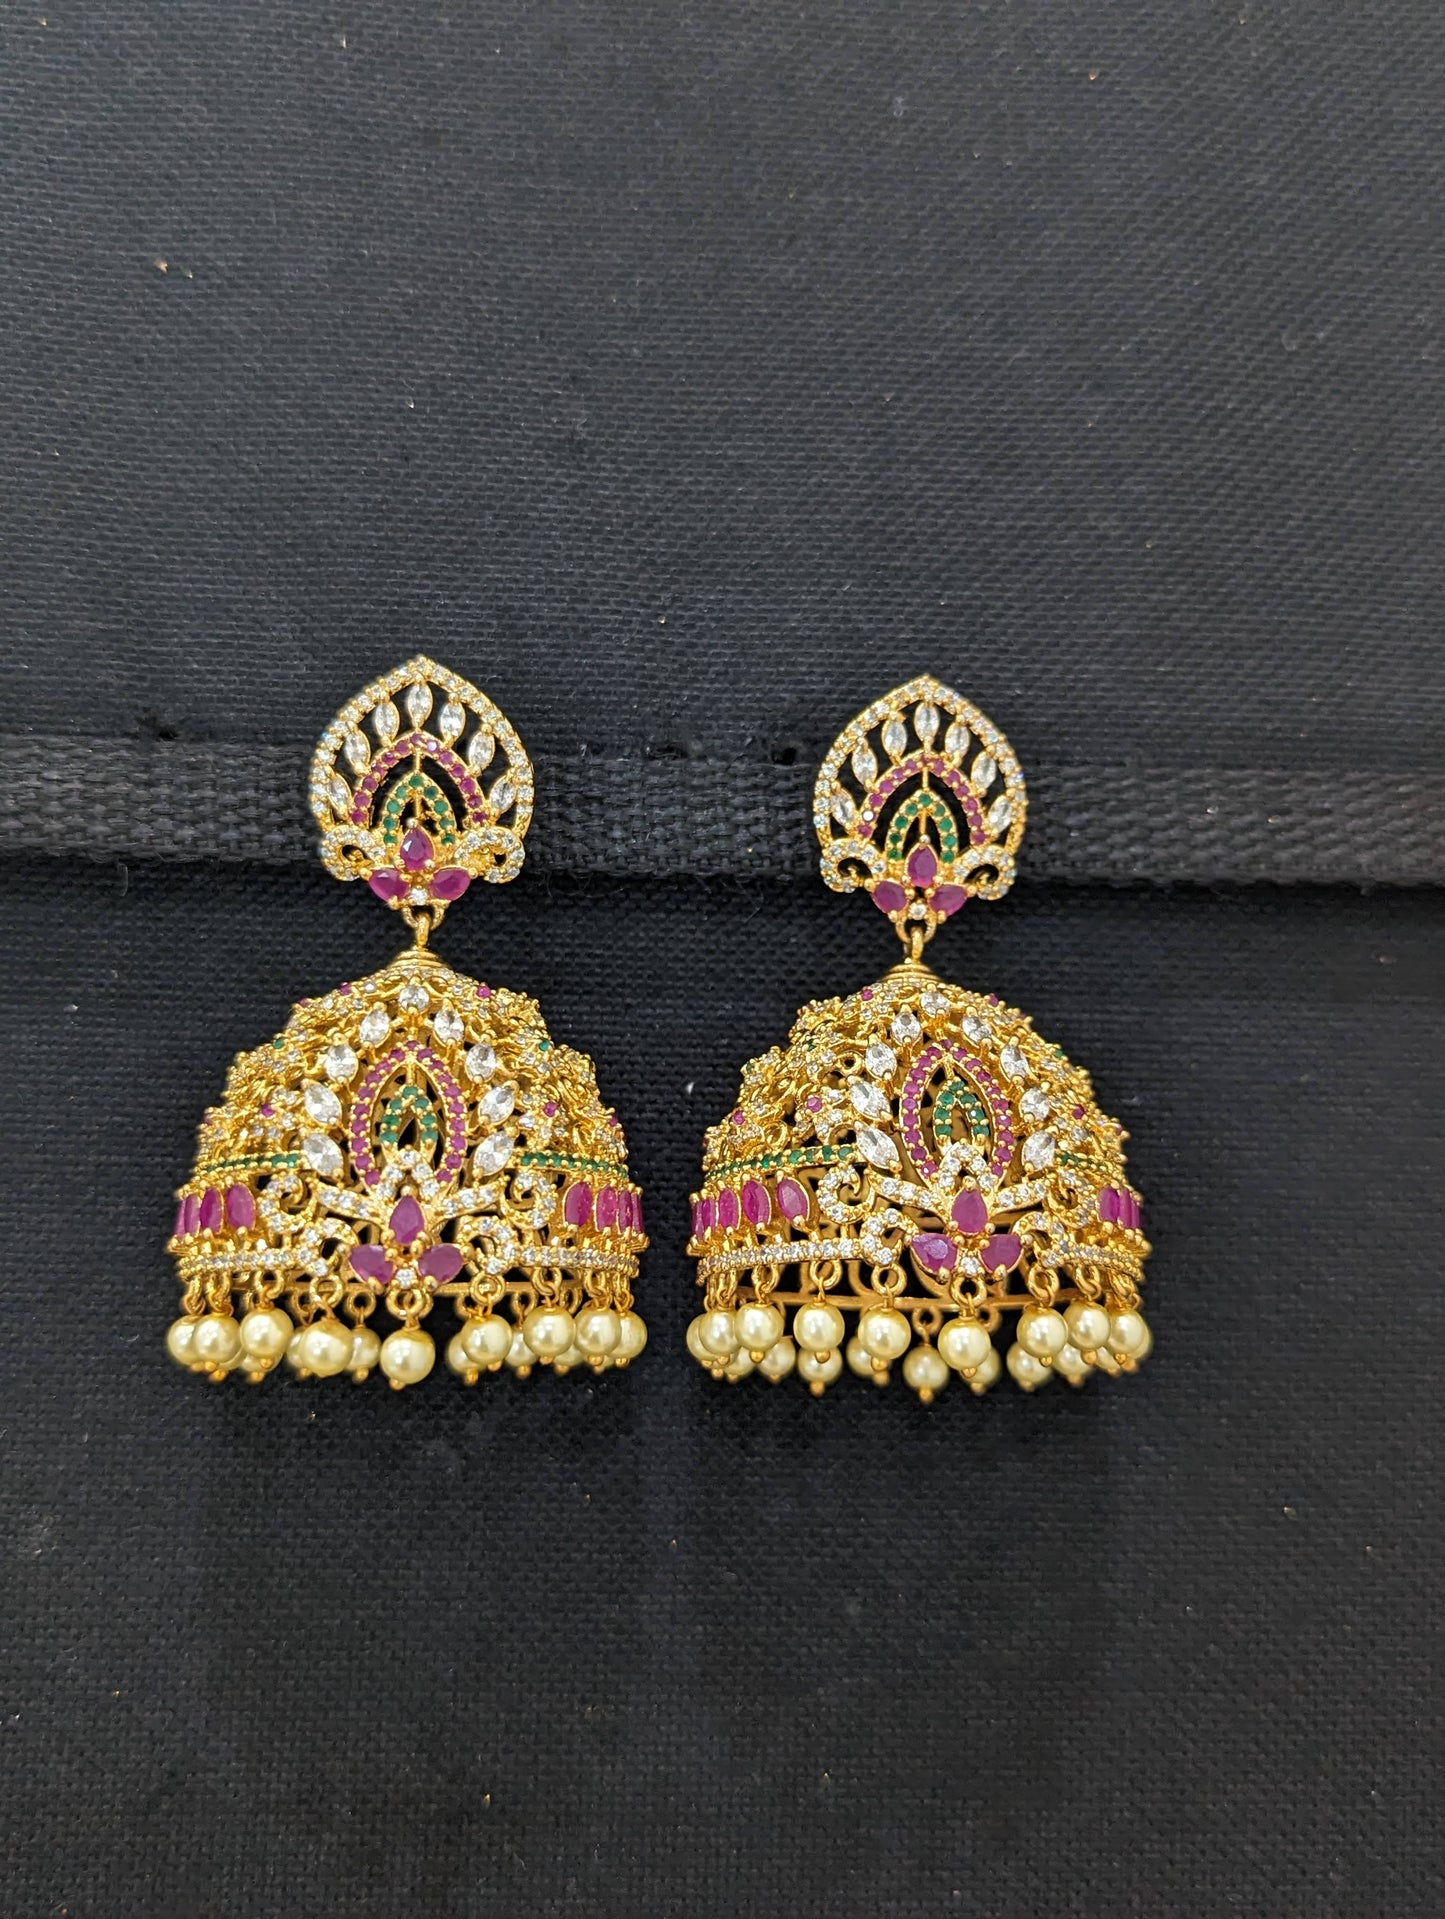 XXL size One gram gold plated Jhumka Earrings